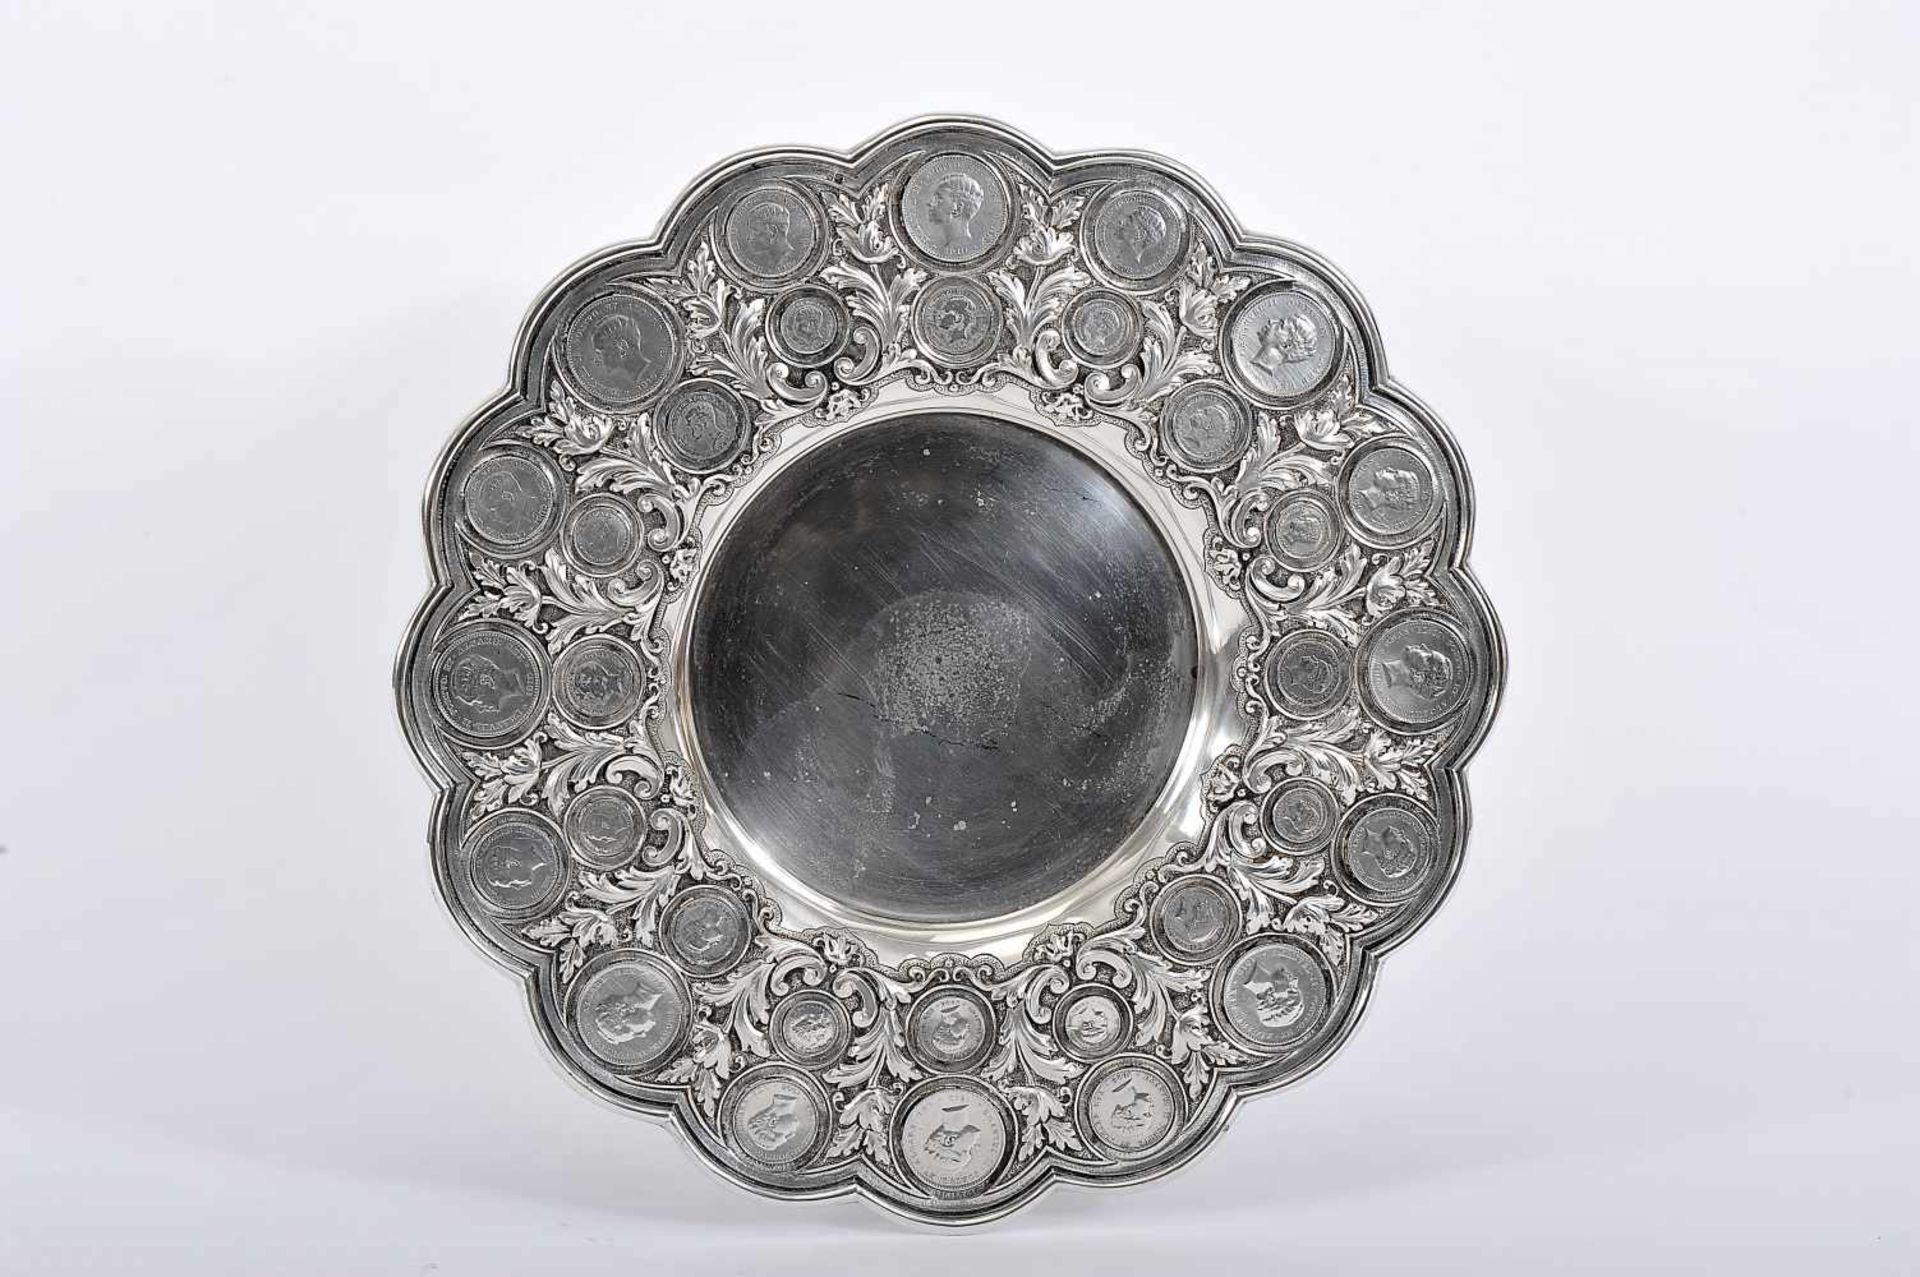 A Polylobate Salver, 833/1000 silver, decoration en relief with thirty-two (32) coins of the reign